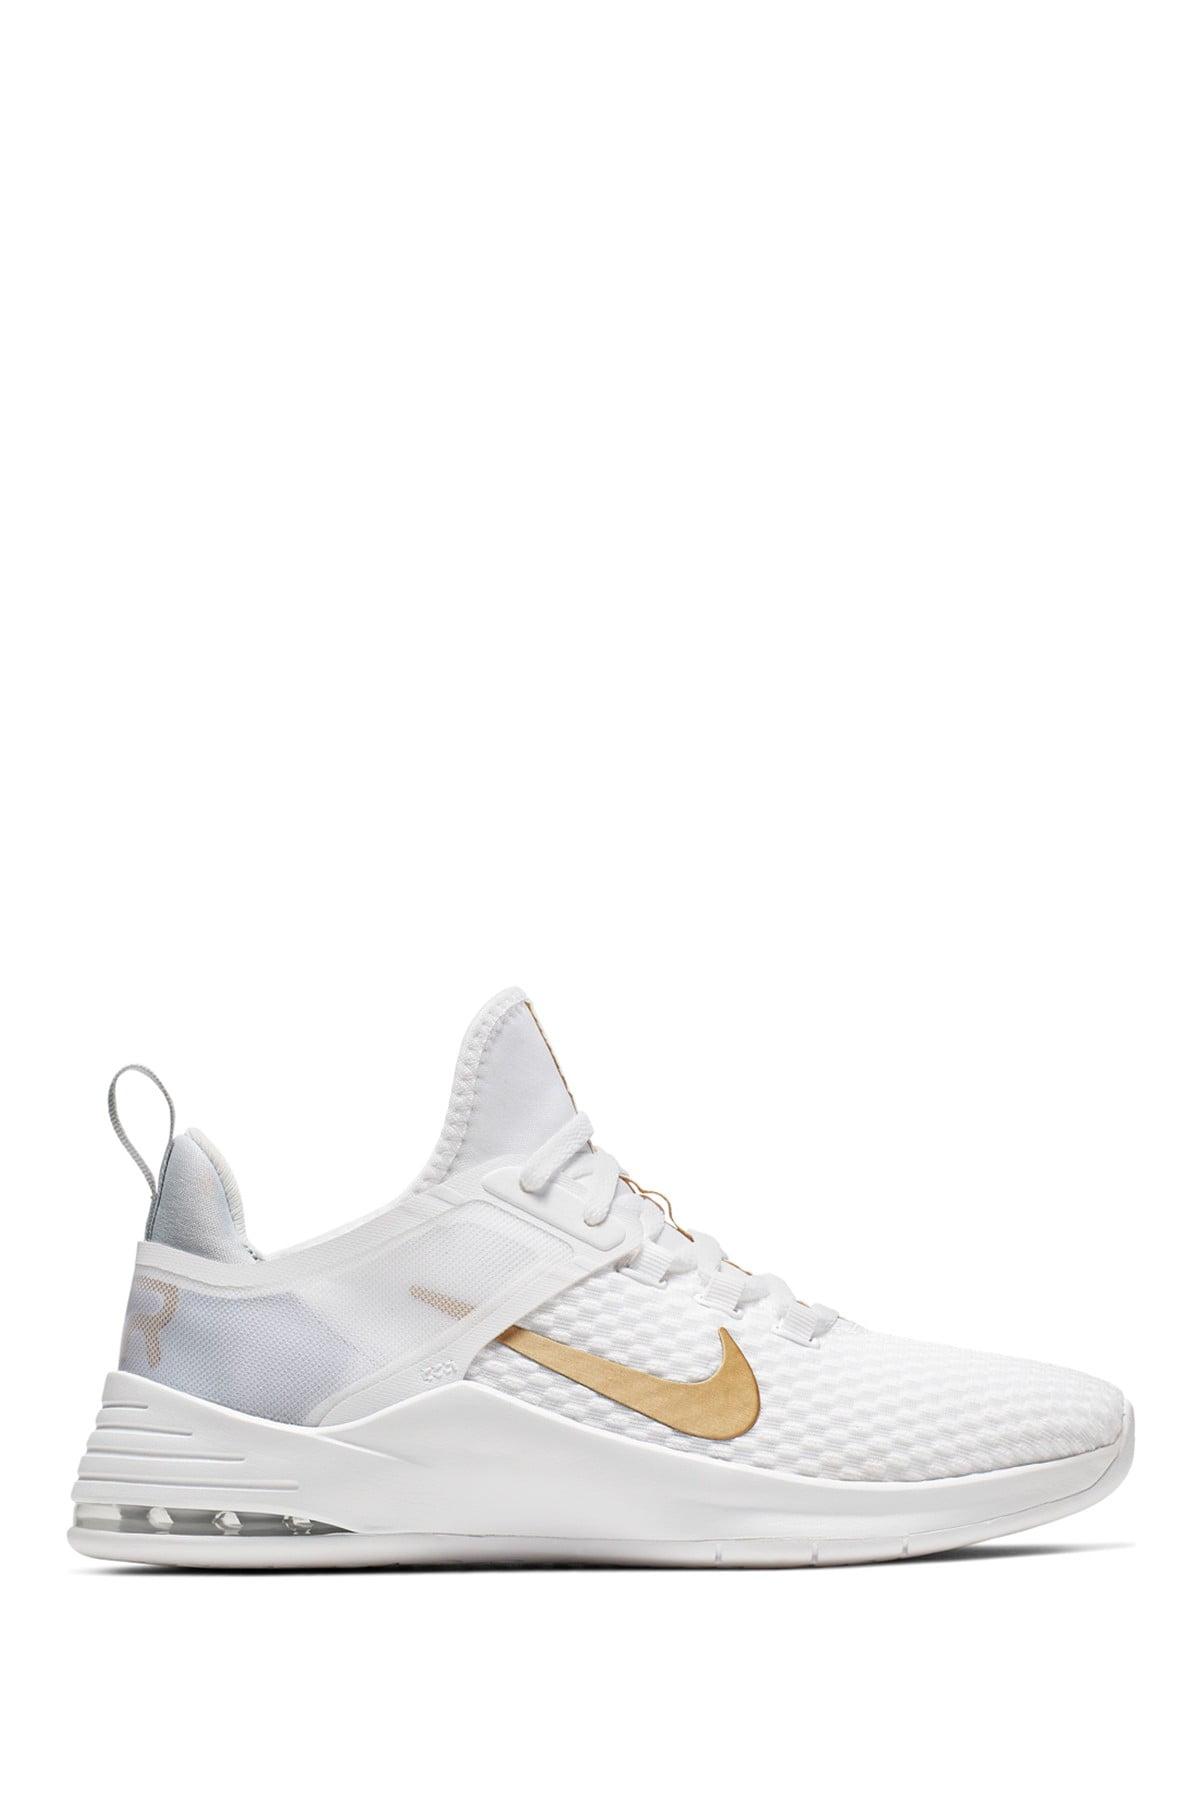 nike air bella white and gold